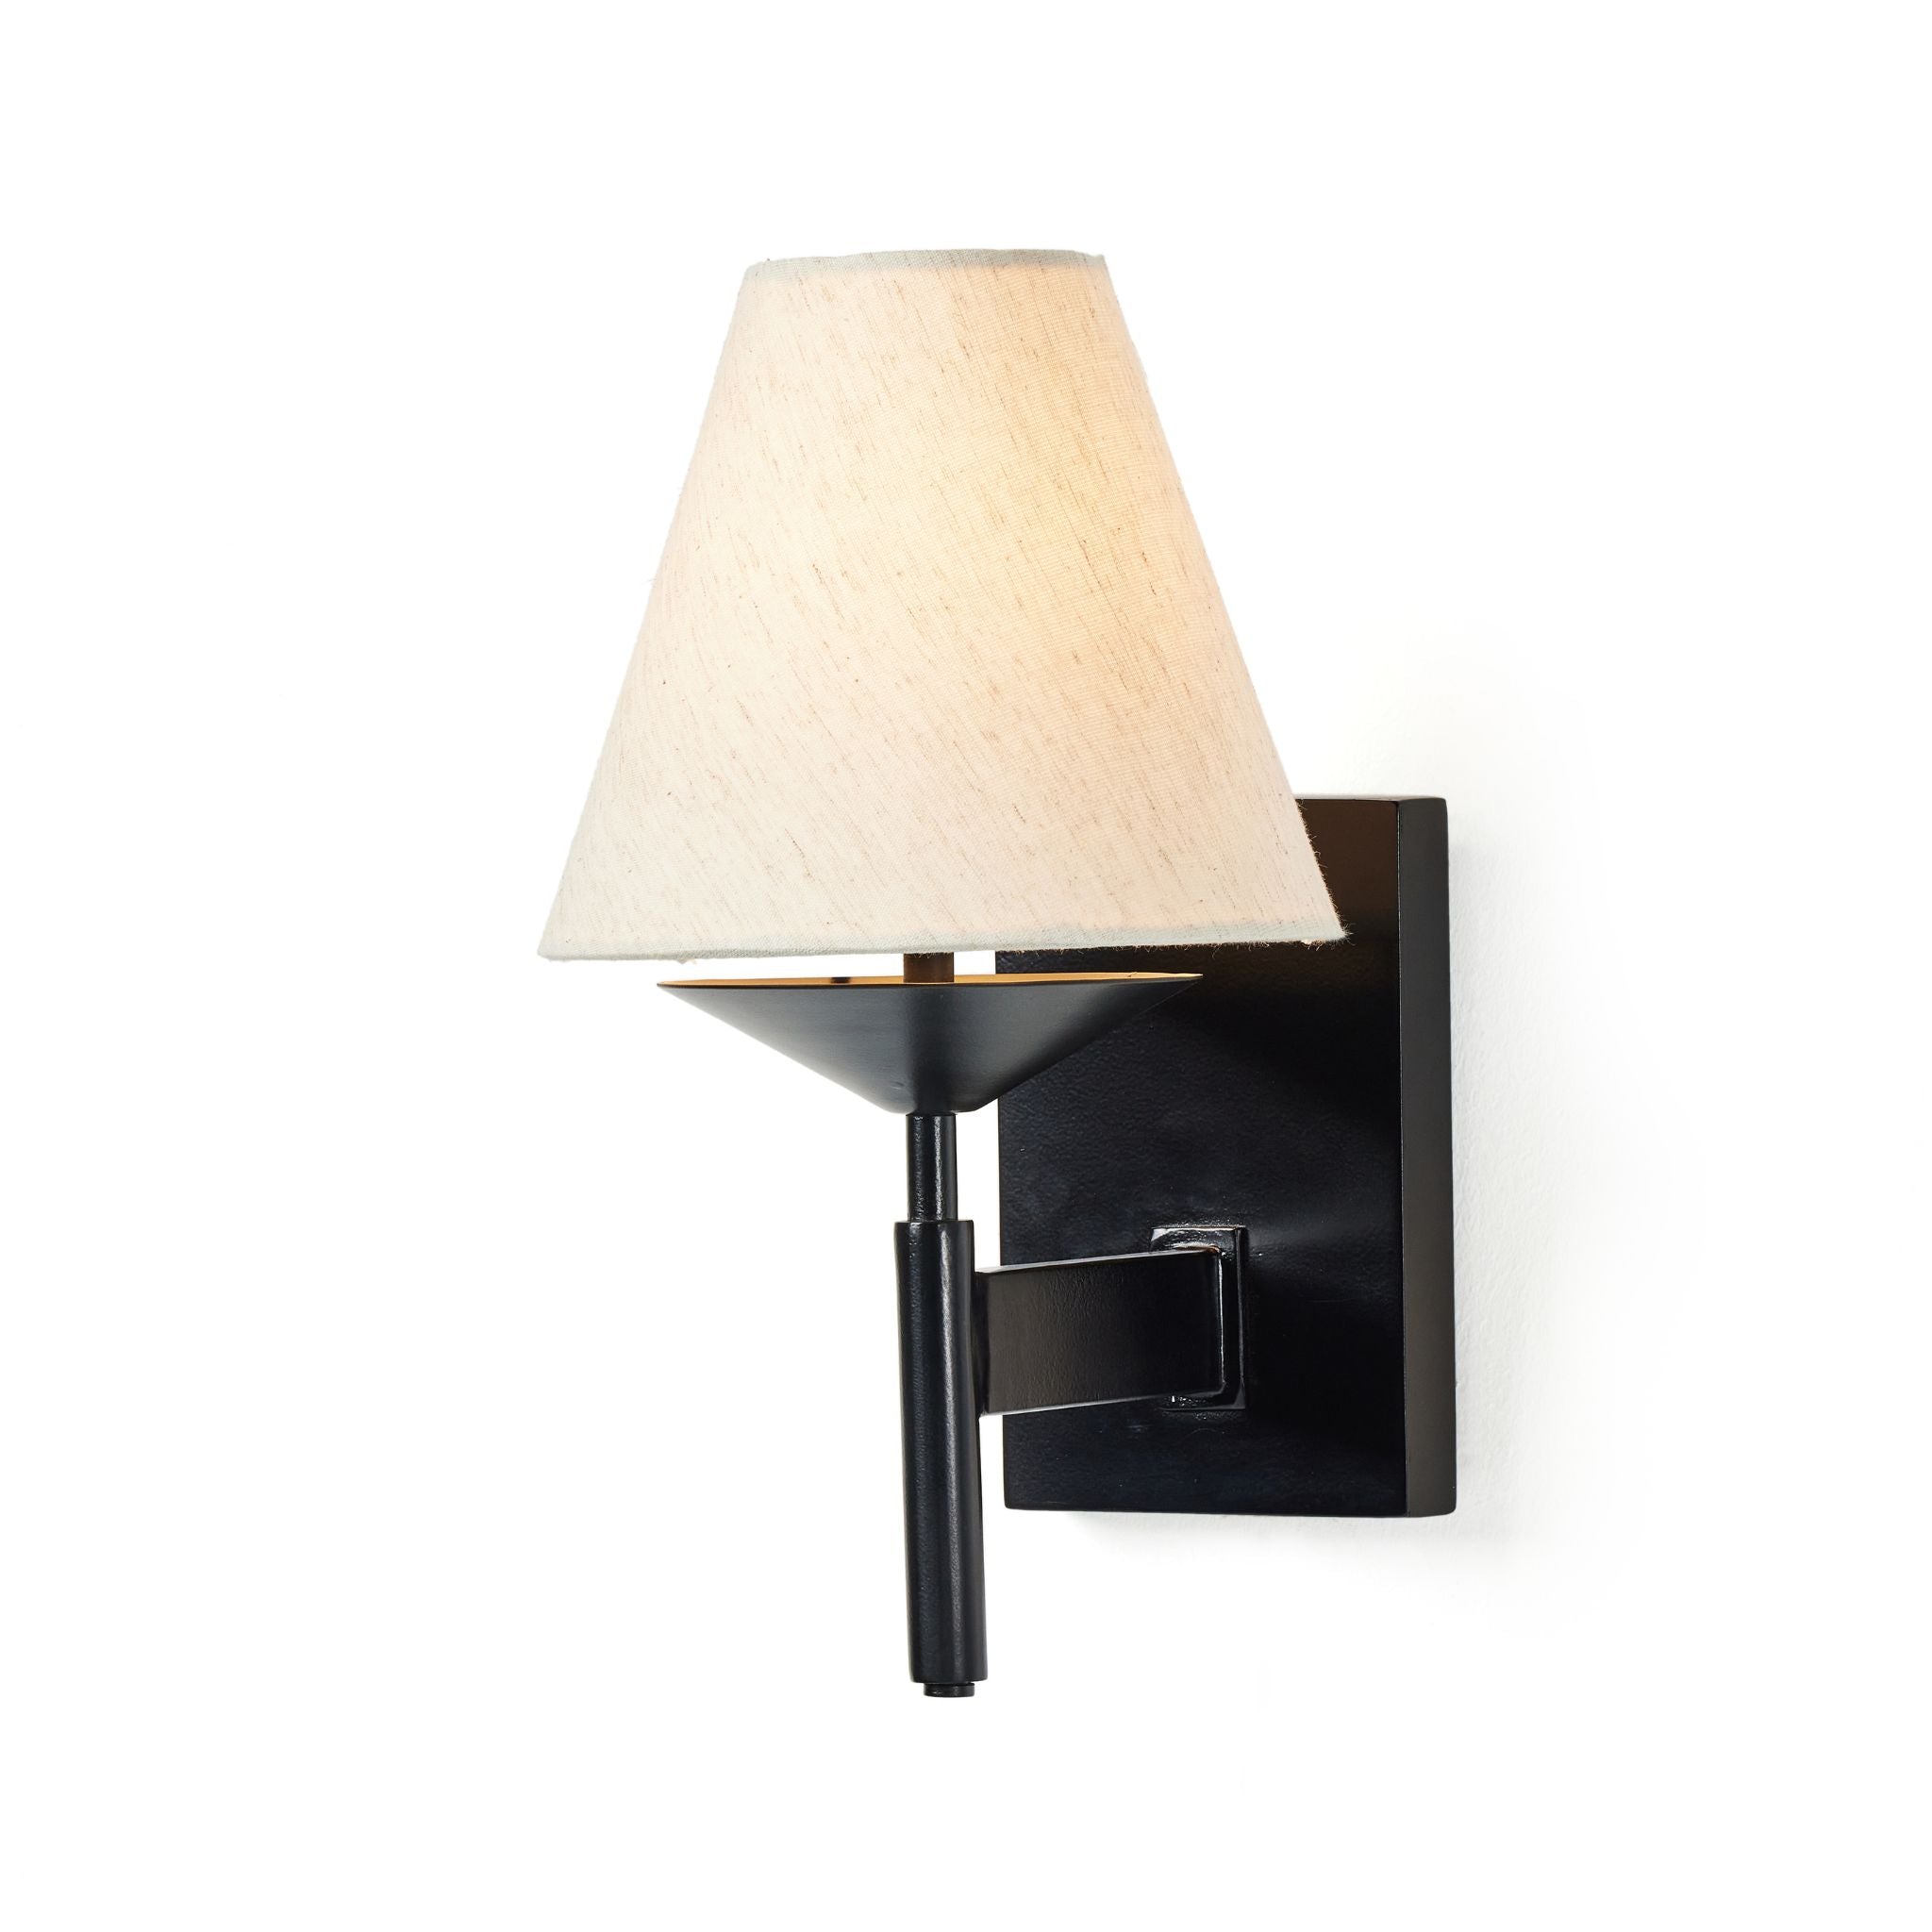 DODIE SCONCE-JET BLACK - Simply Elevated Home Furnishing SLC 